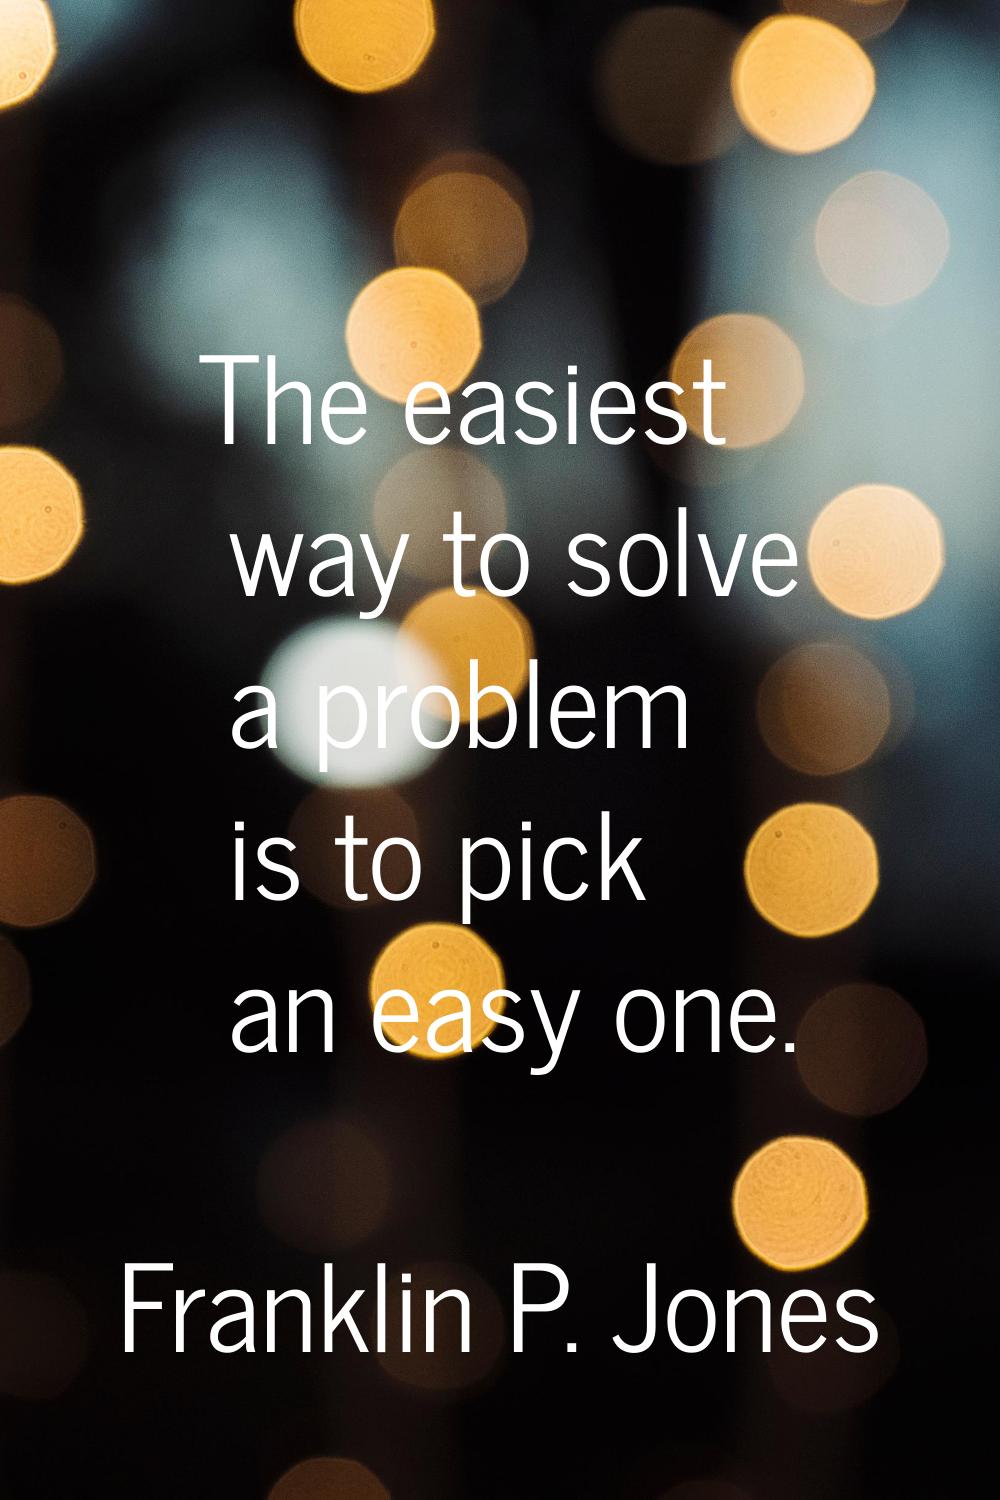 The easiest way to solve a problem is to pick an easy one.